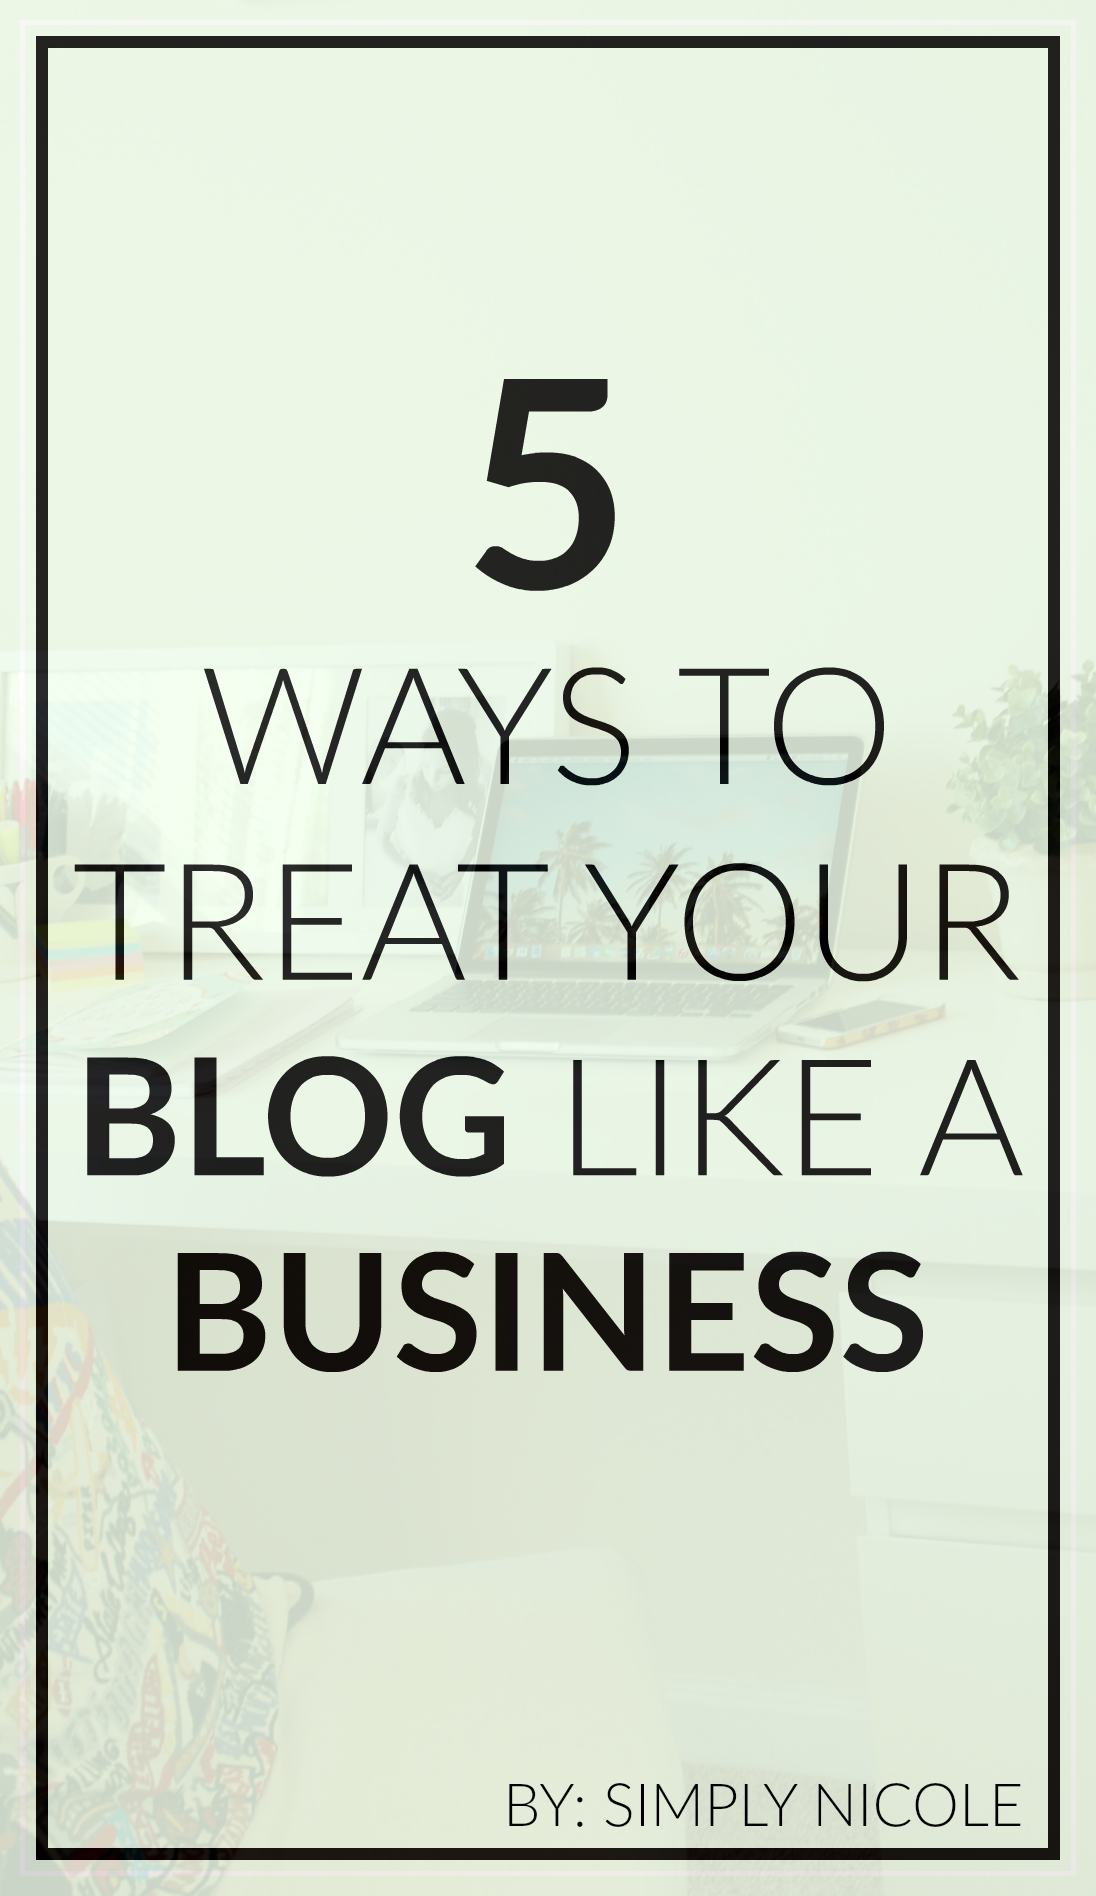 5 Ways to Treat Your Blog Like a Business